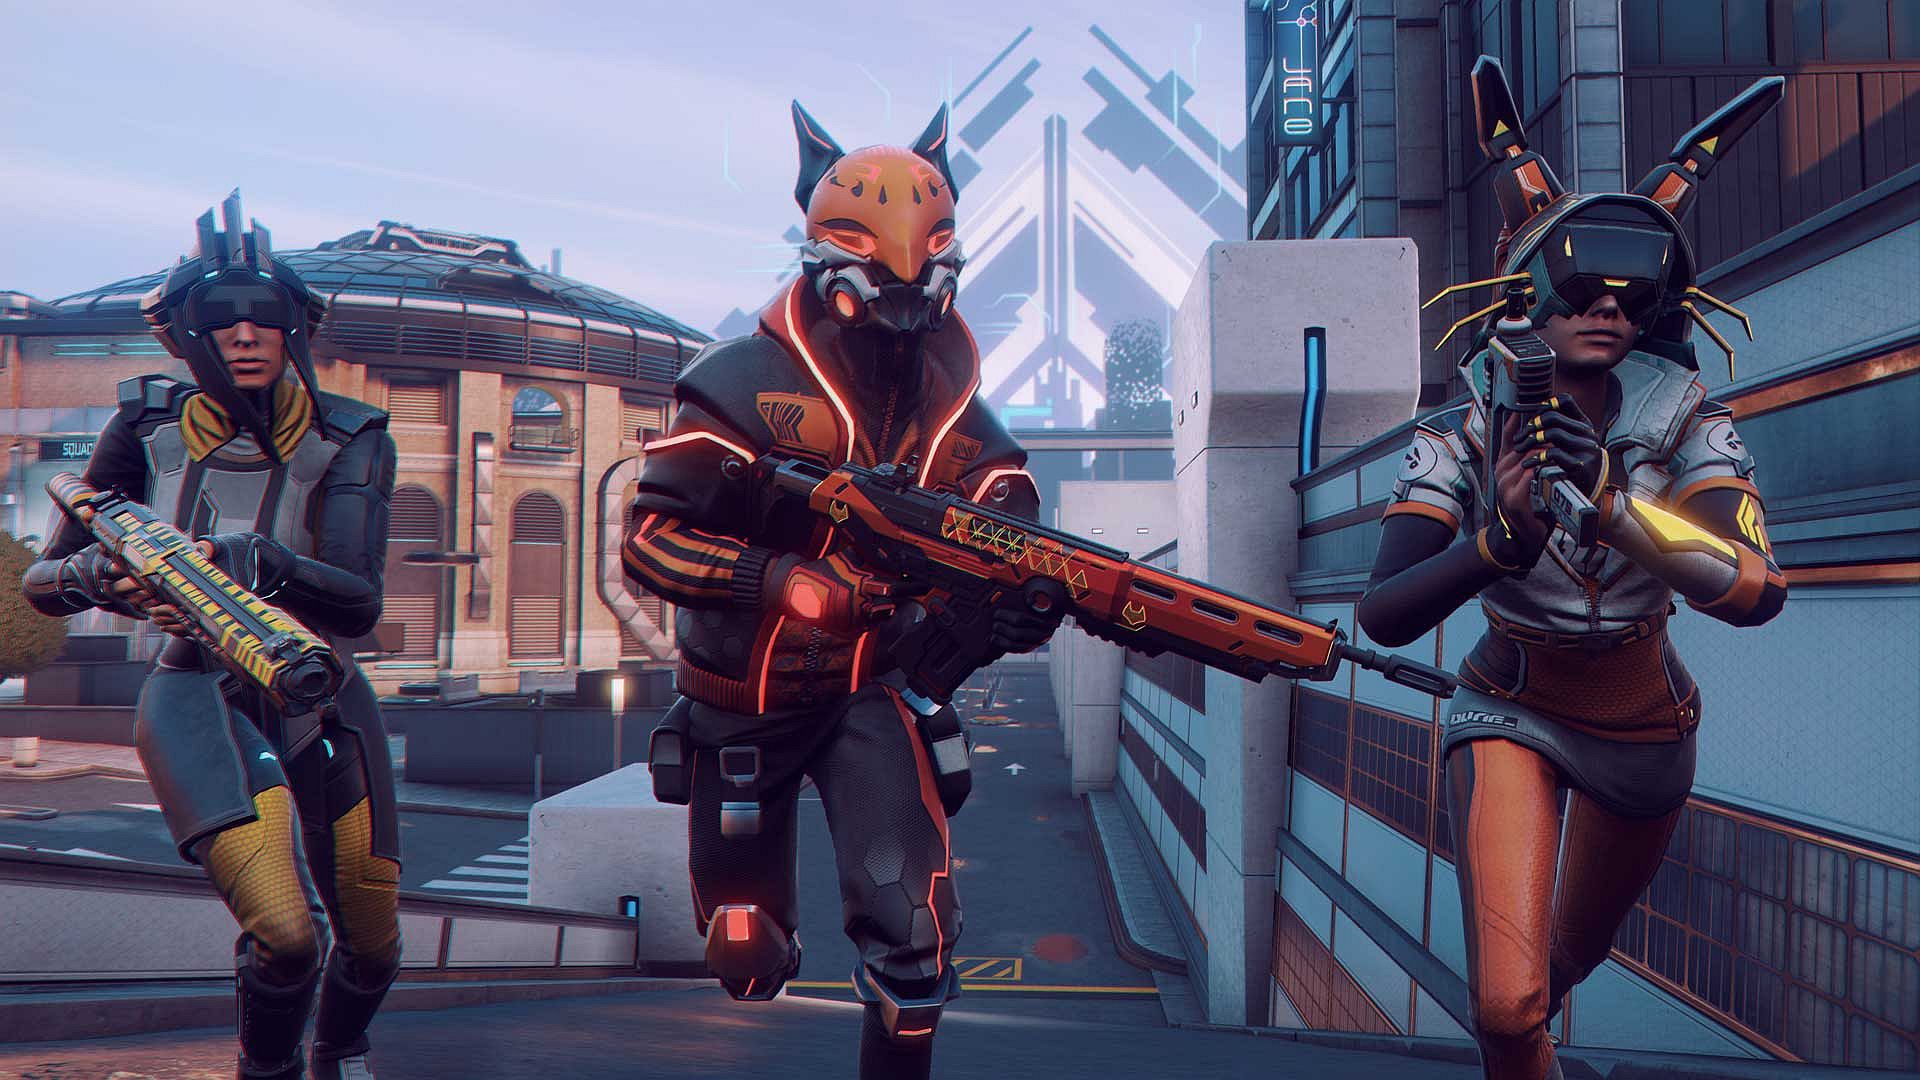 Image for Ubisoft is shutting down its free-to-play battle royale shooter Hyper Scape